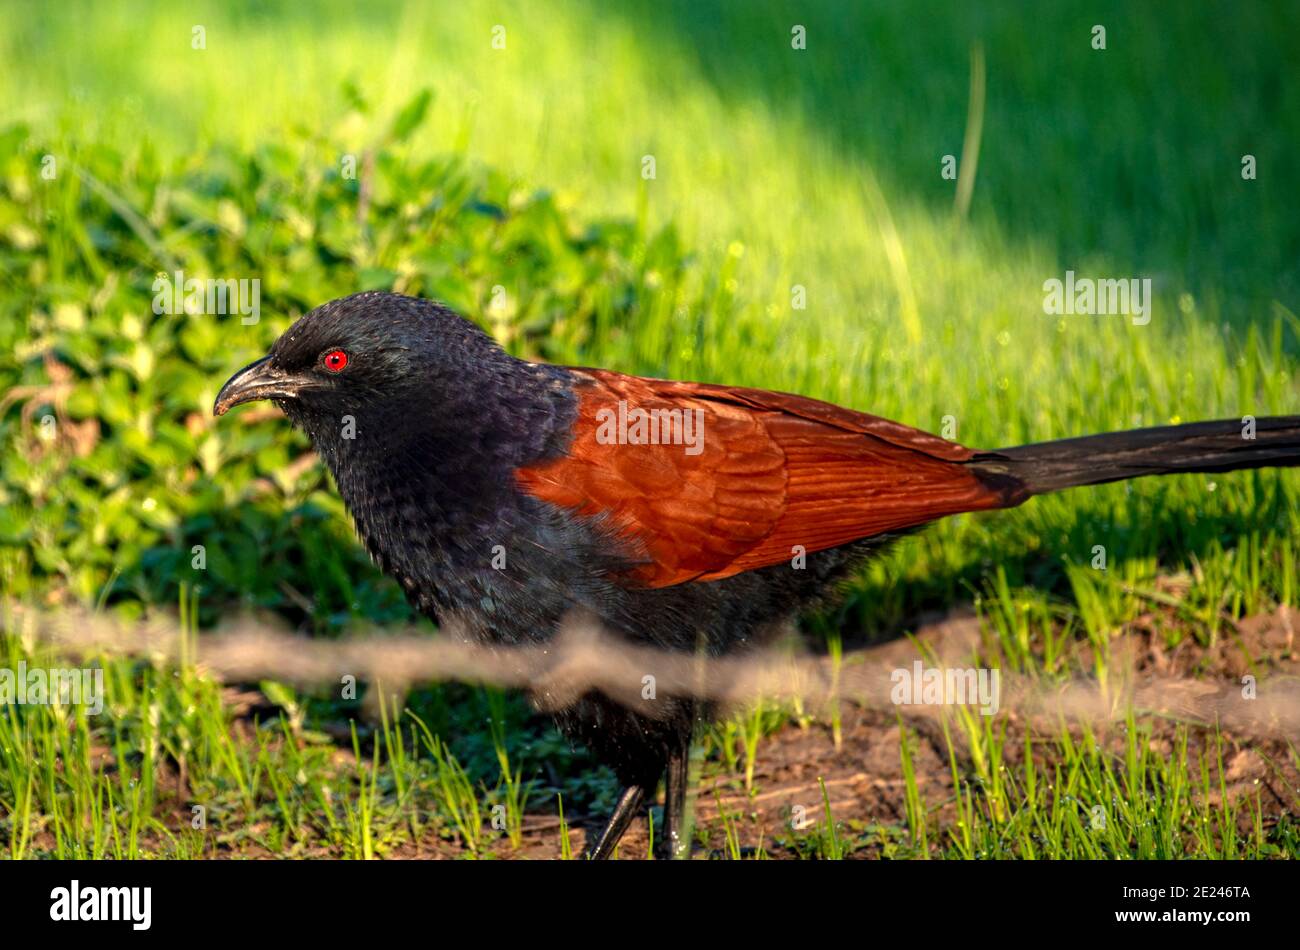 The greater coucal or crow pheasant, is a large non-parasitic member of the cuckoo order of birds, the Cuculiformes. Stock Photo